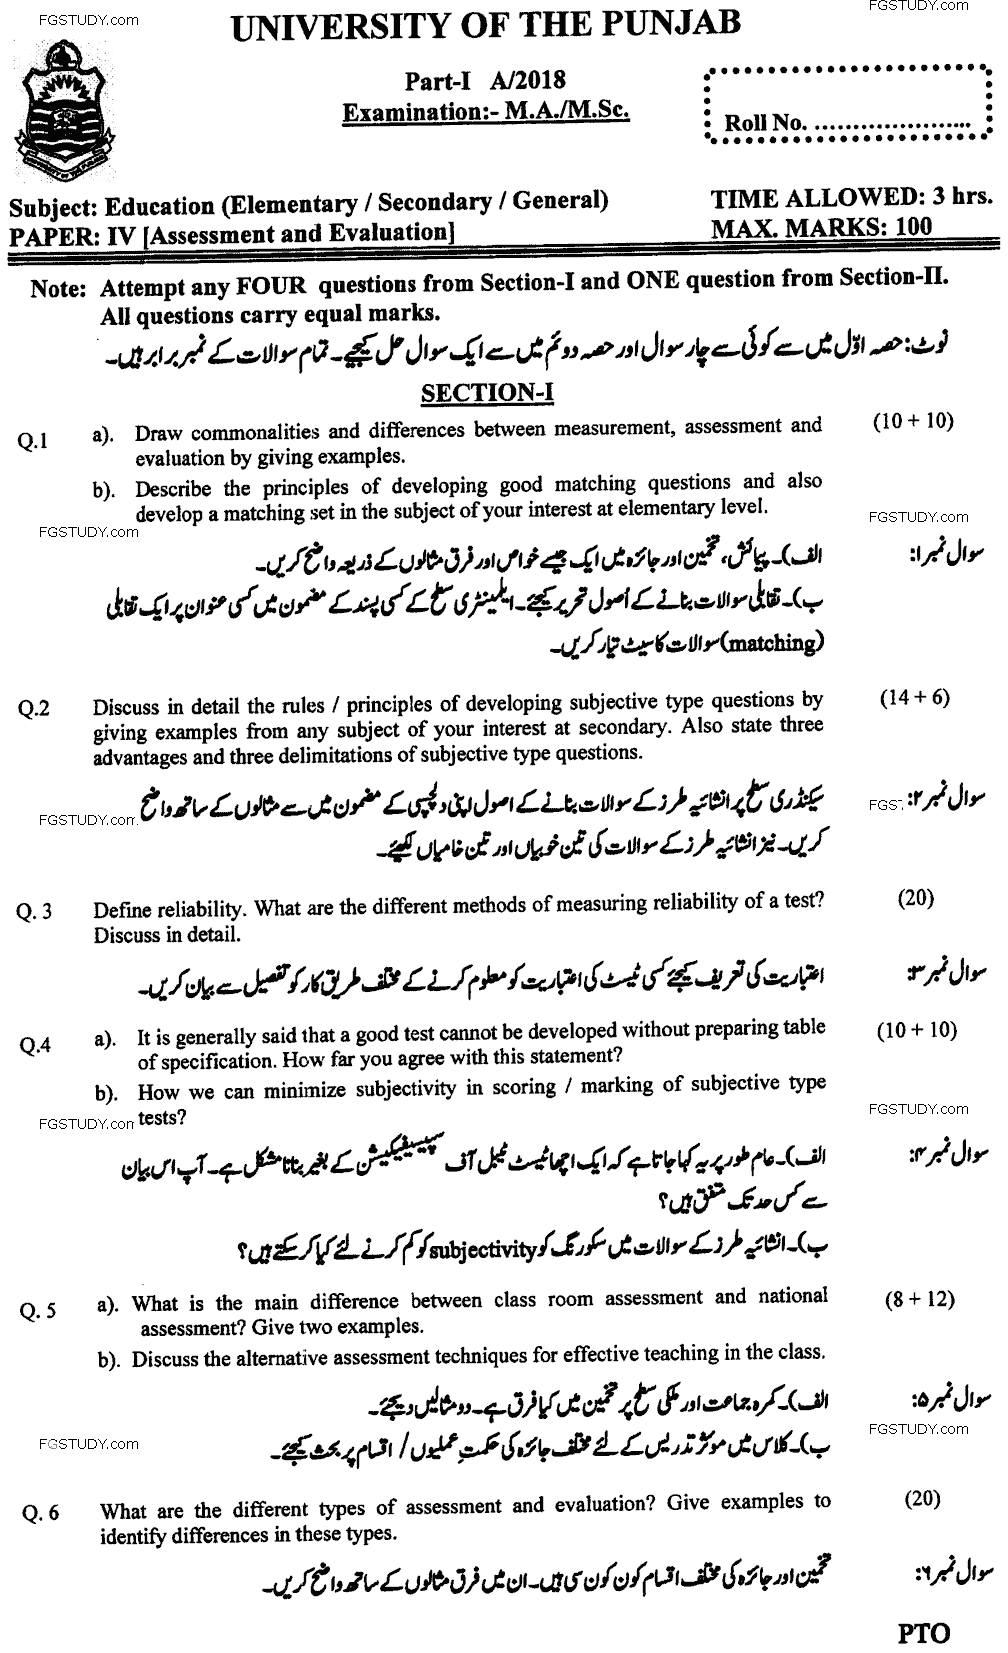 MA Part 1 Education Elementary Assessment And Evaluation Past Paper 2018 Punjab University